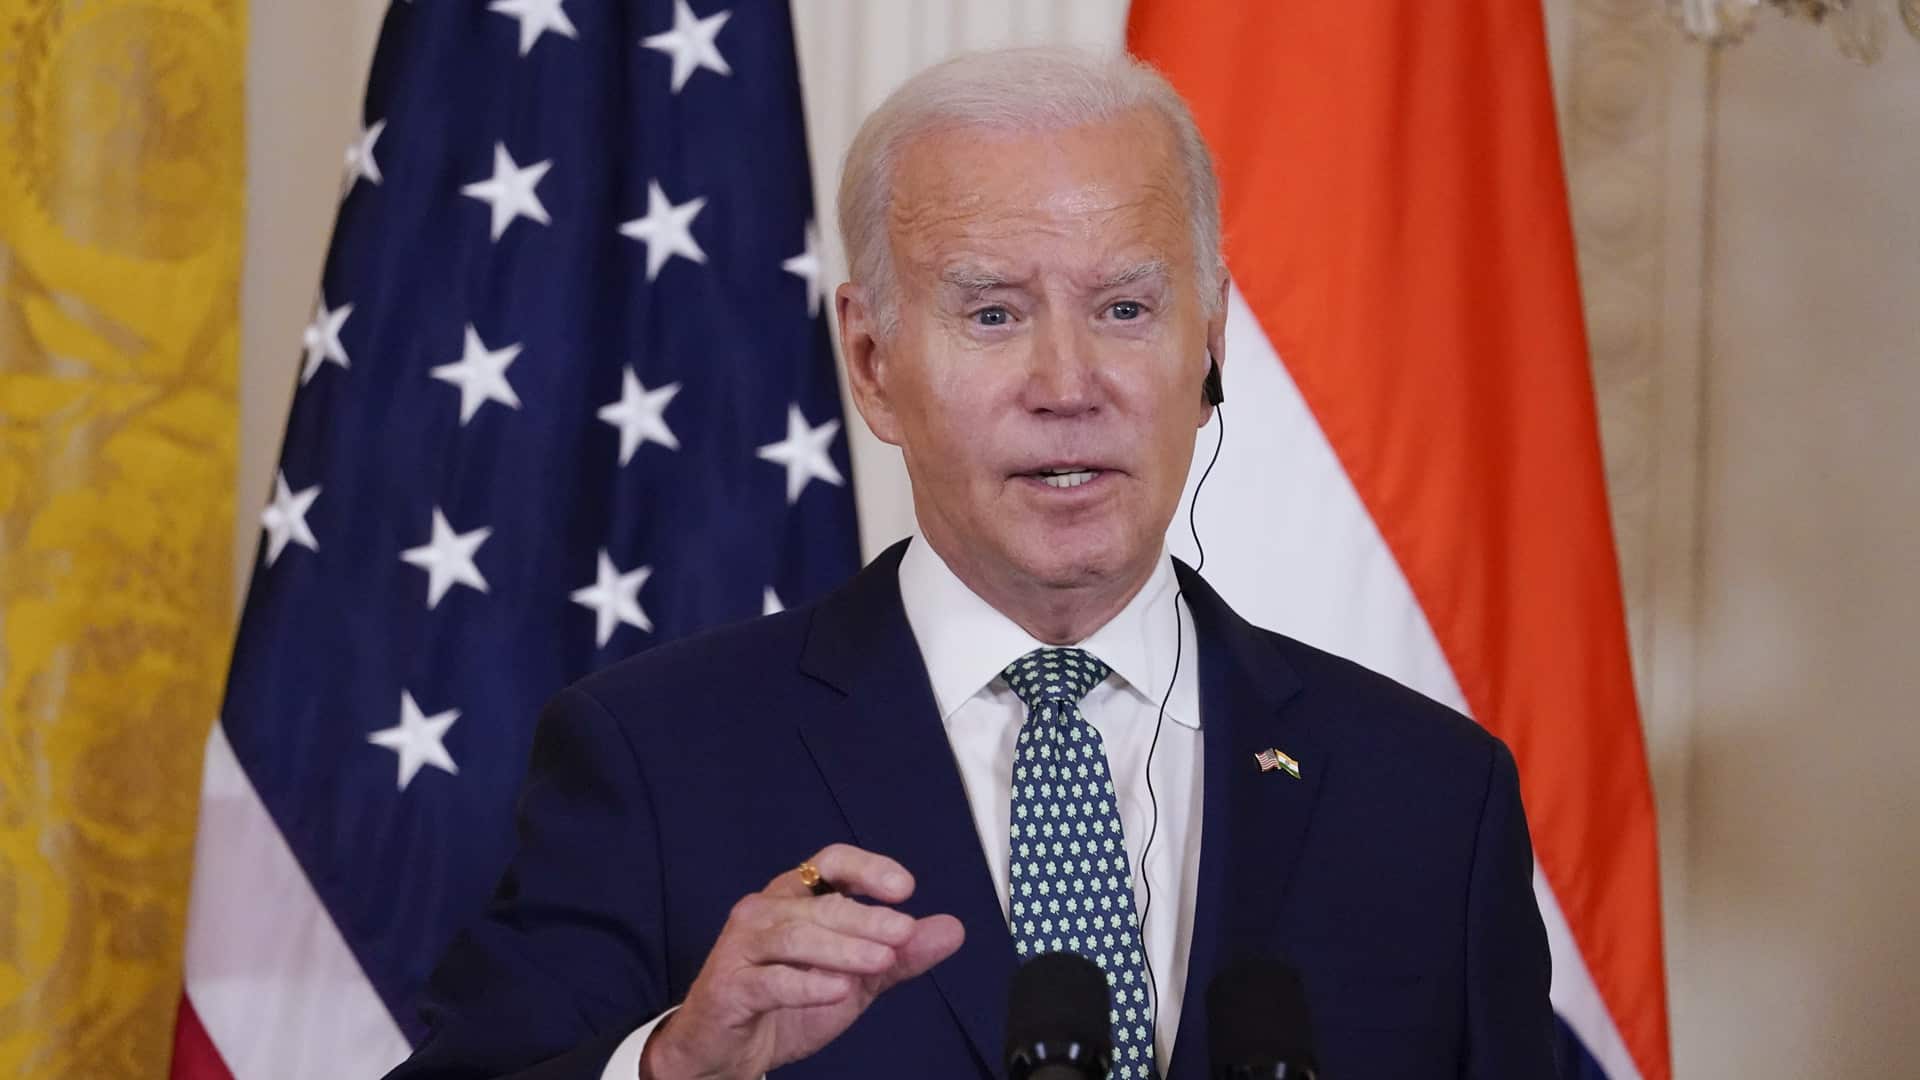 India, US plan to send Indian astronaut to International Space Station in 2024: Biden